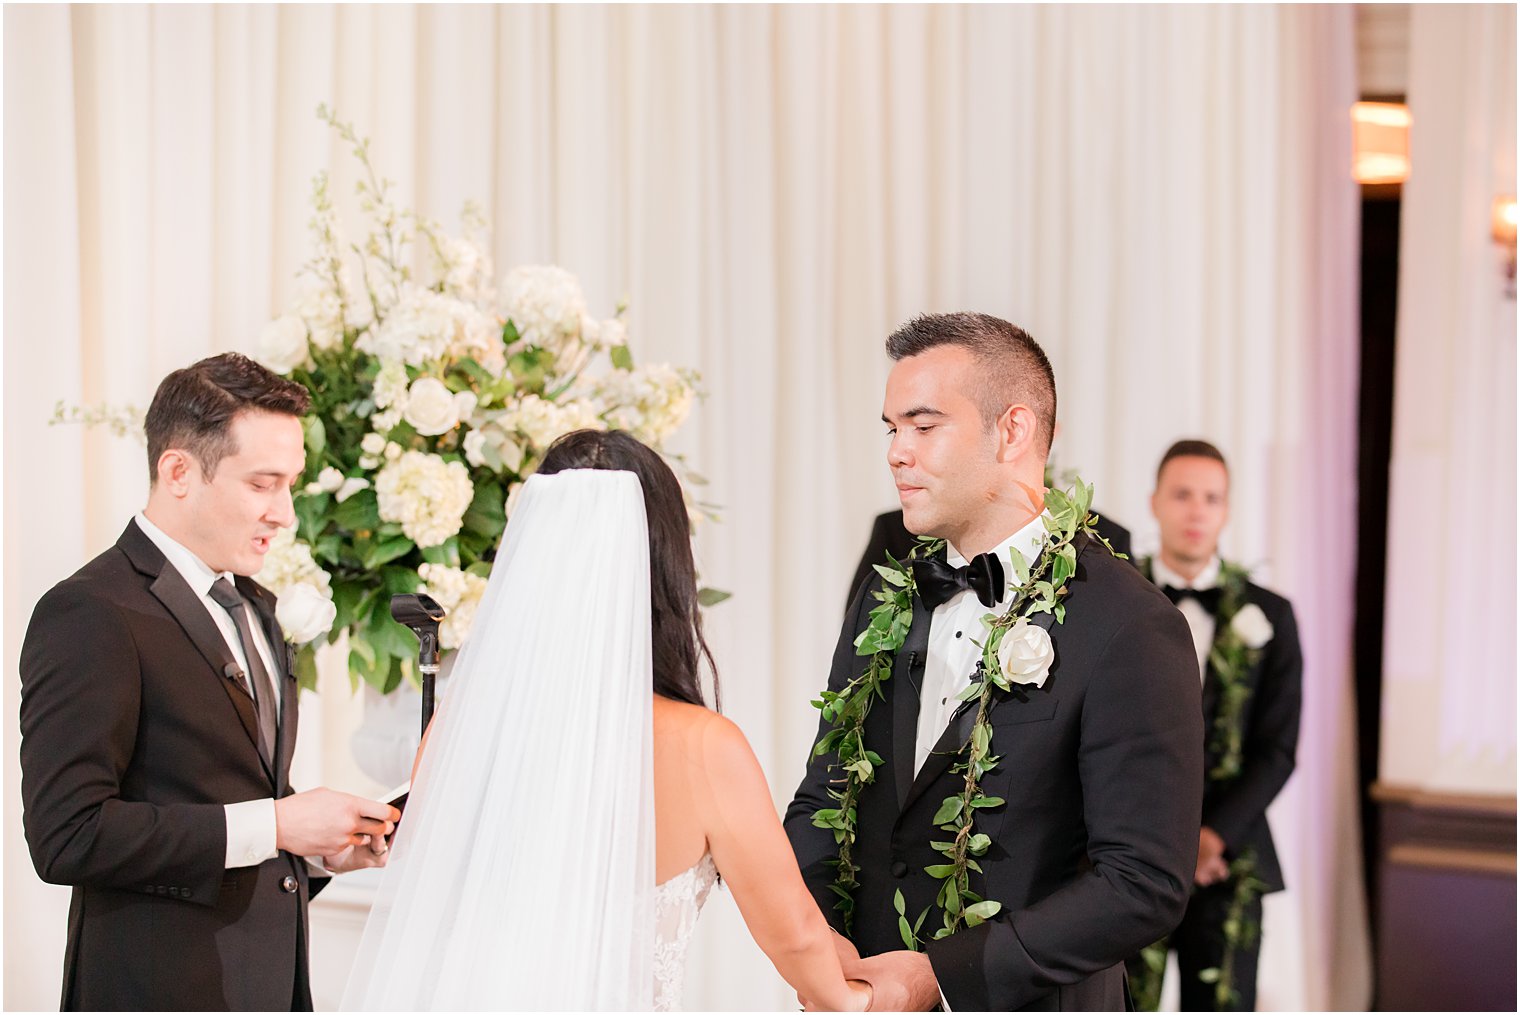 groom with greenery around neck smiles at bride during ceremony at the Ballroom at the Ben